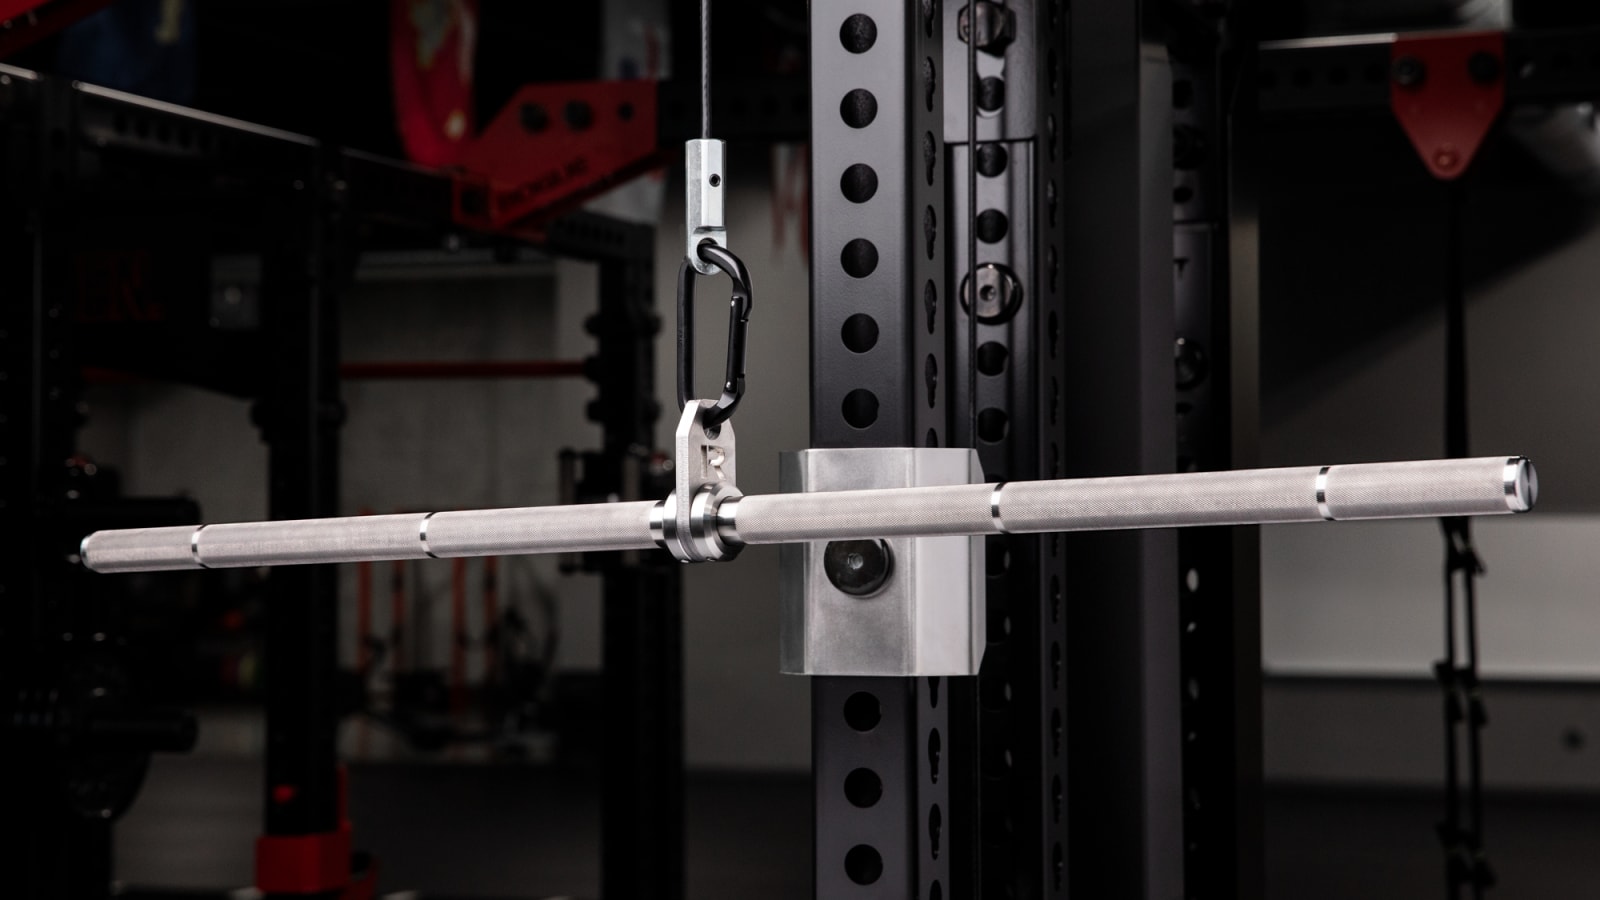 Rogue Stainless Straight Lat Bar